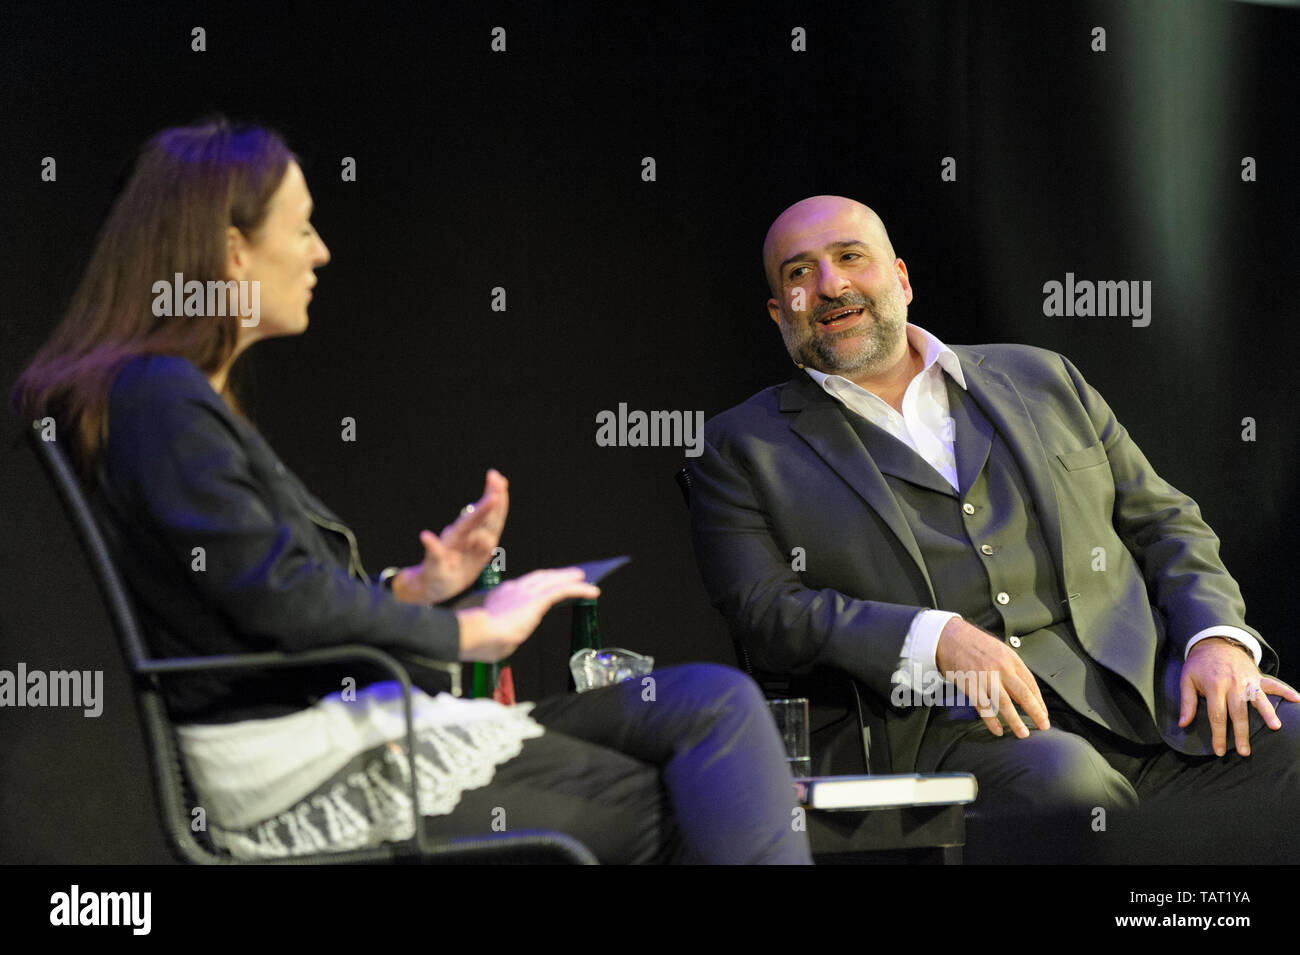 British-Iranian stand-up comedian, actor, television producer and writer Omid Djalili at the Cheltenham Literature Festival, October 9, 2014 Stock Photo